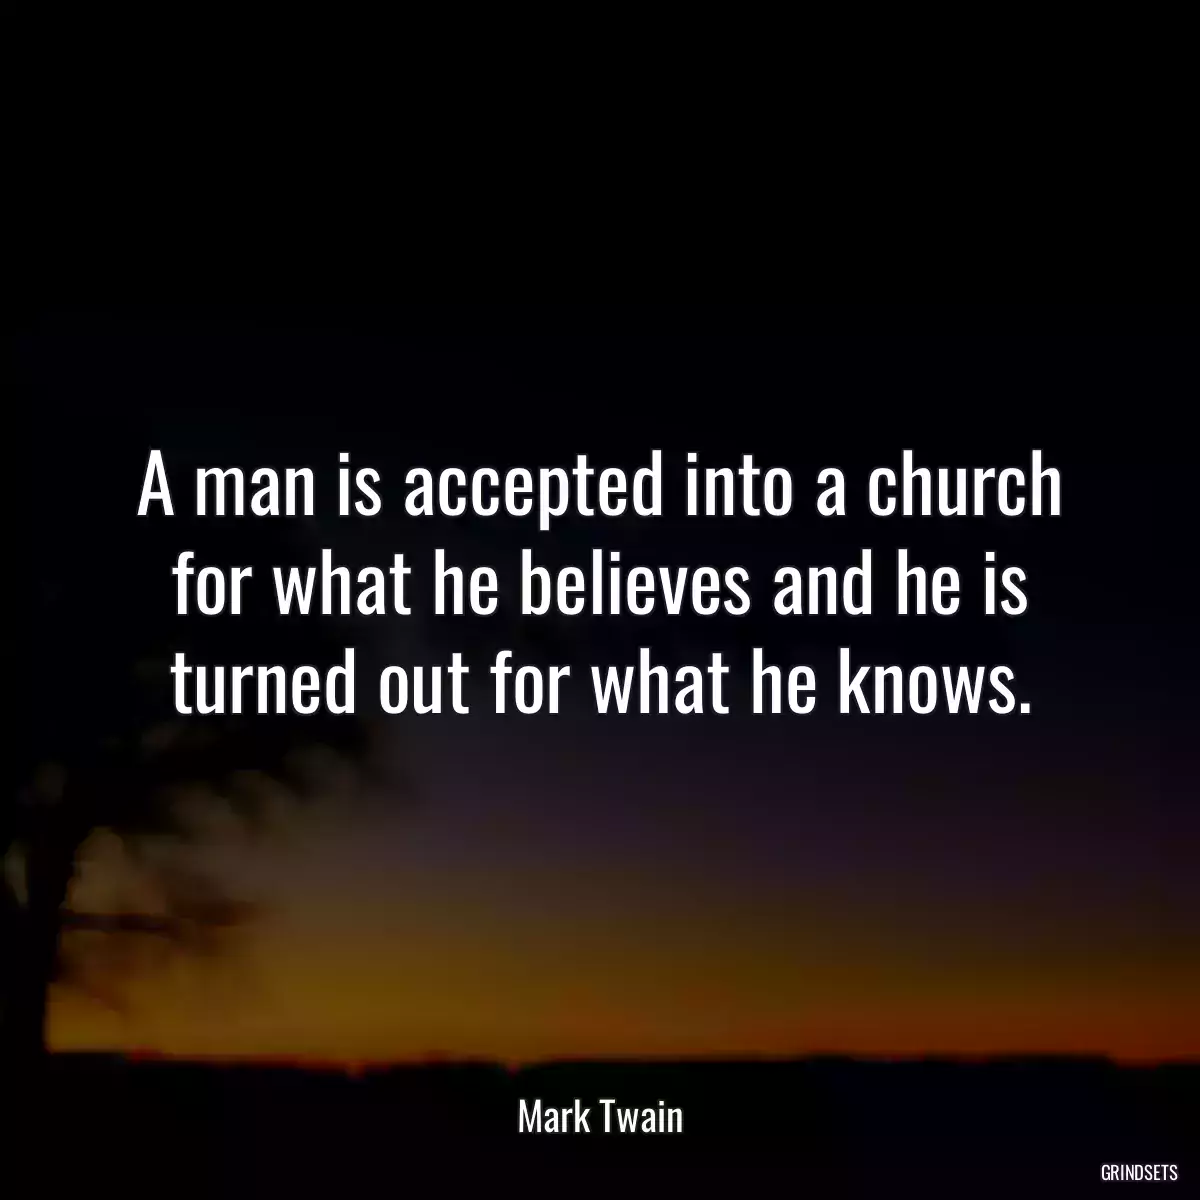 A man is accepted into a church for what he believes and he is turned out for what he knows.